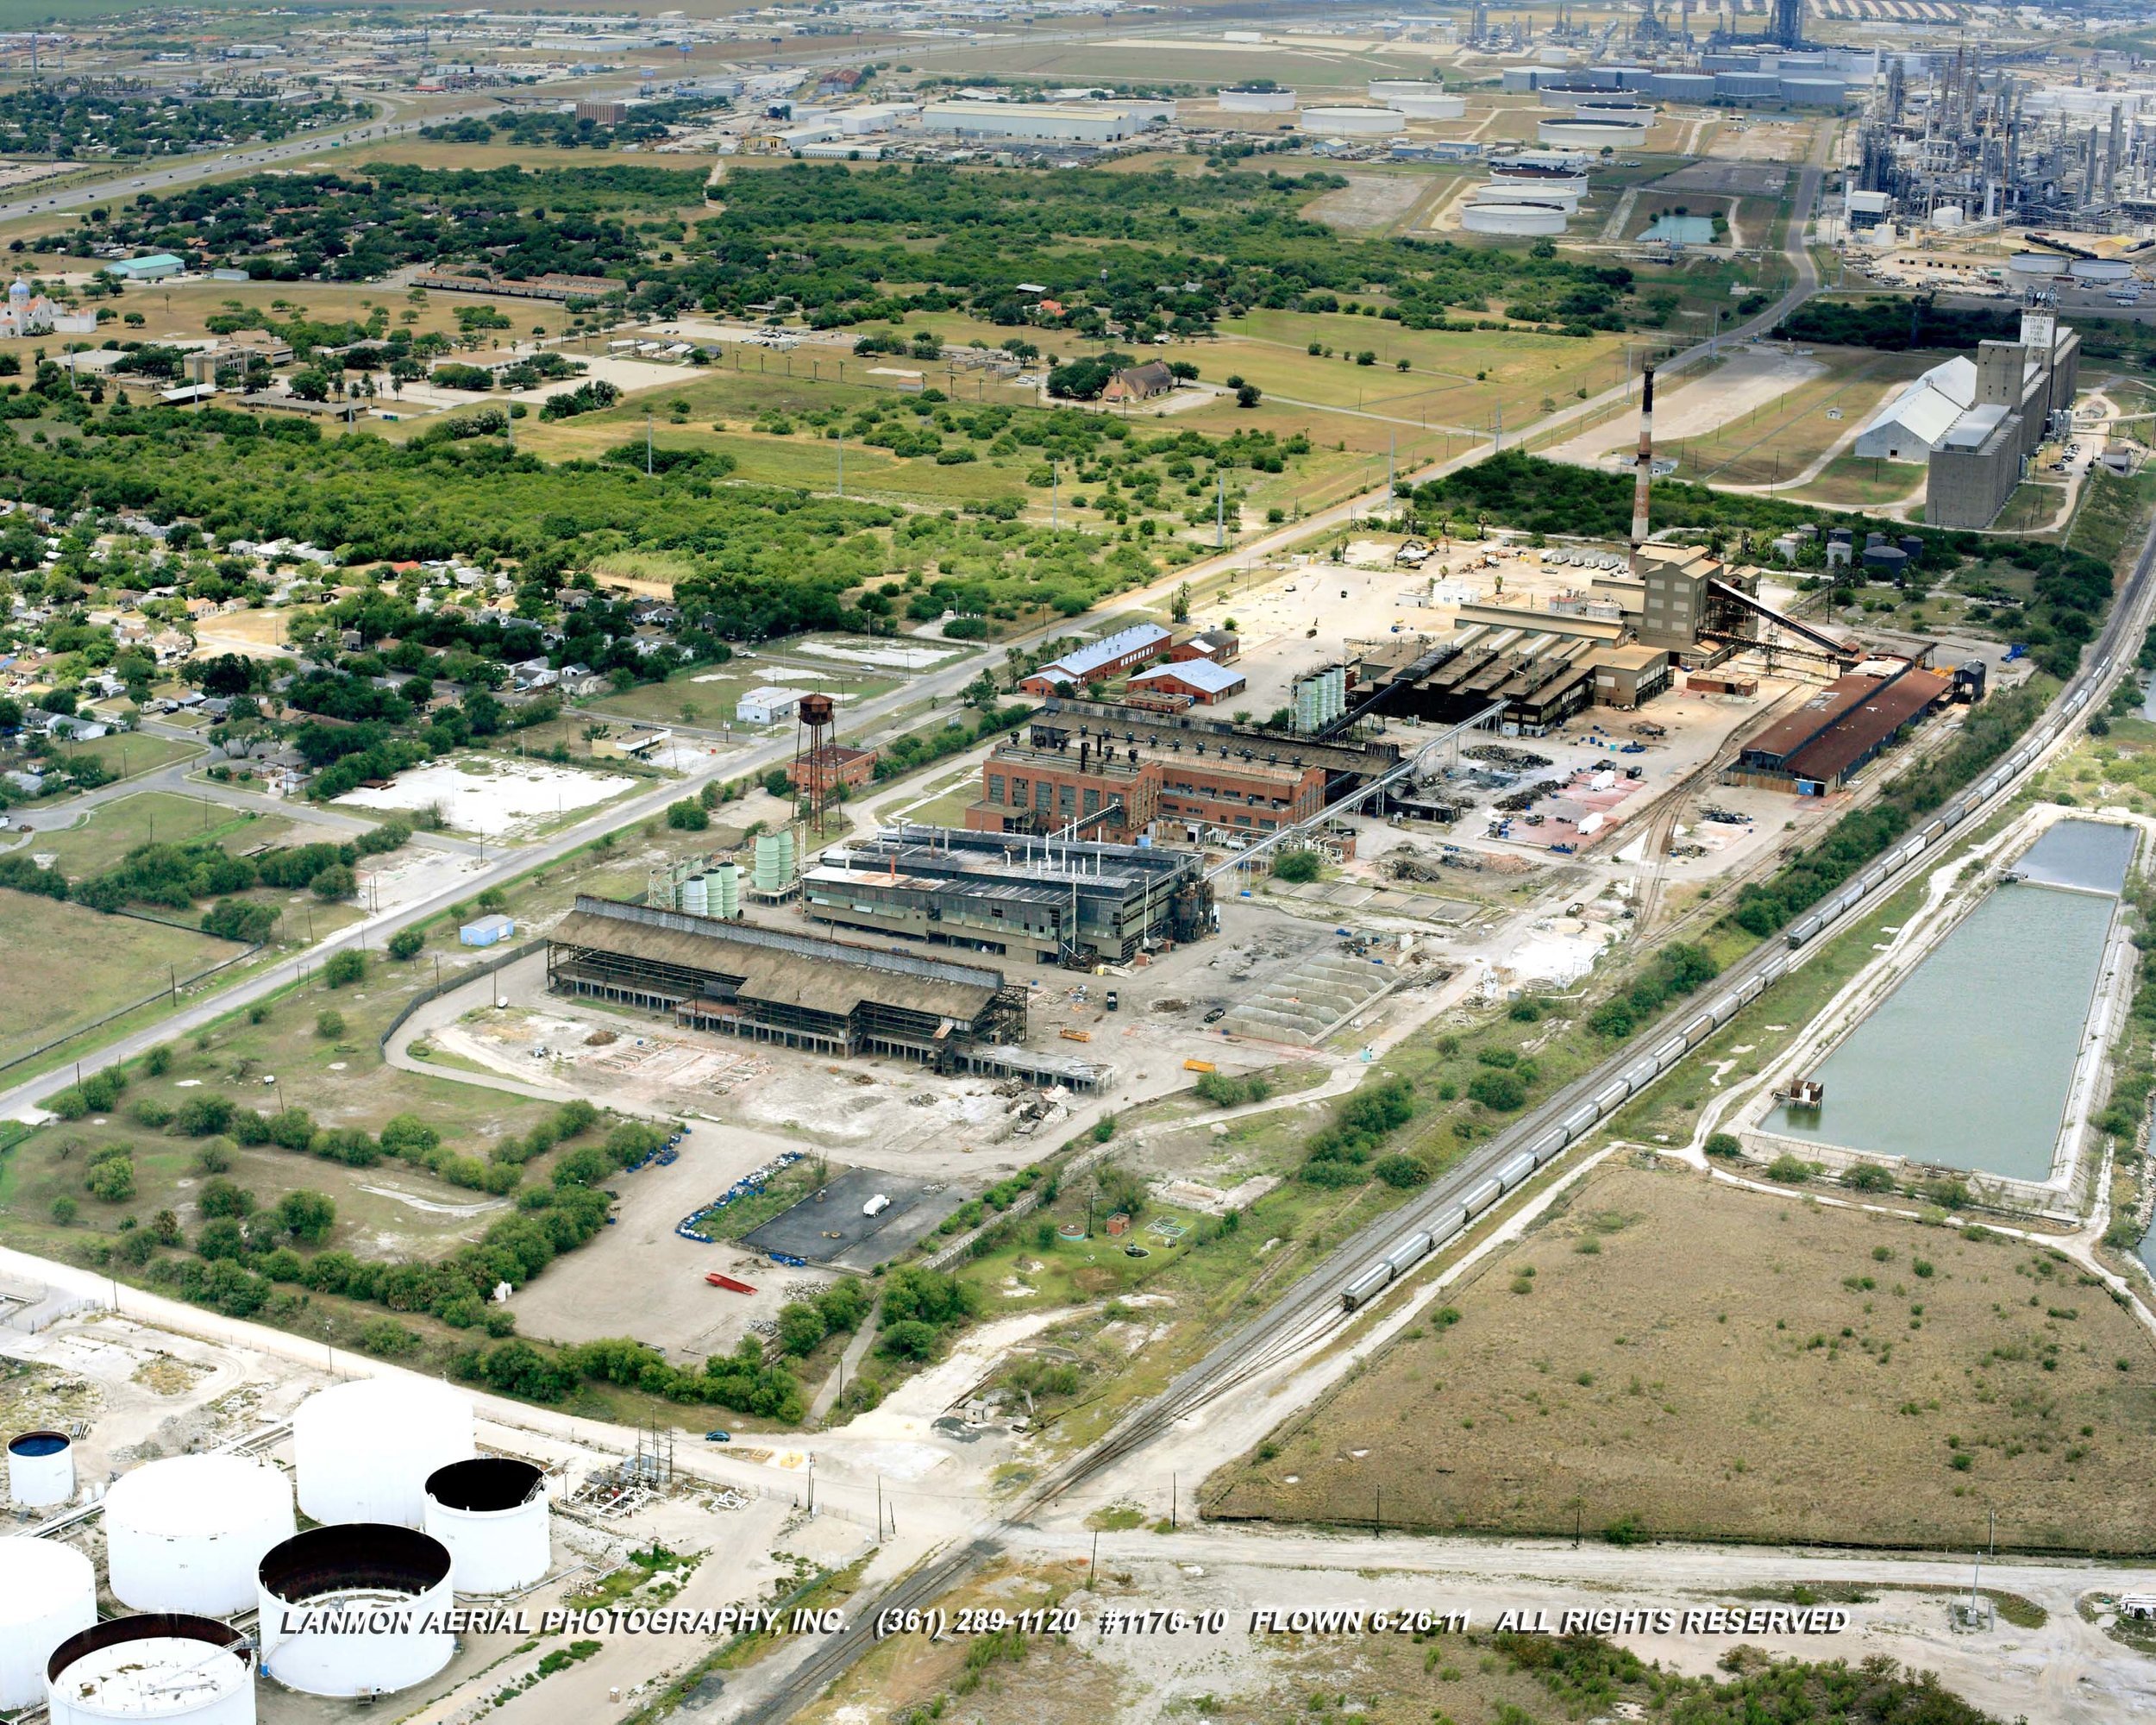 Encycle/ASARCO Facility - Superfund Demolition